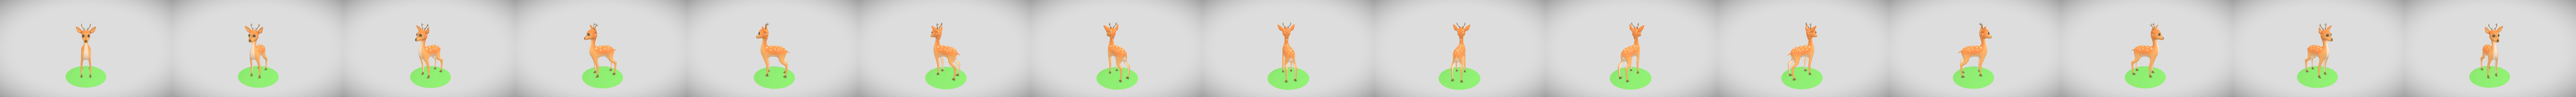 Fawn Bambi and Faline 3D model rigged